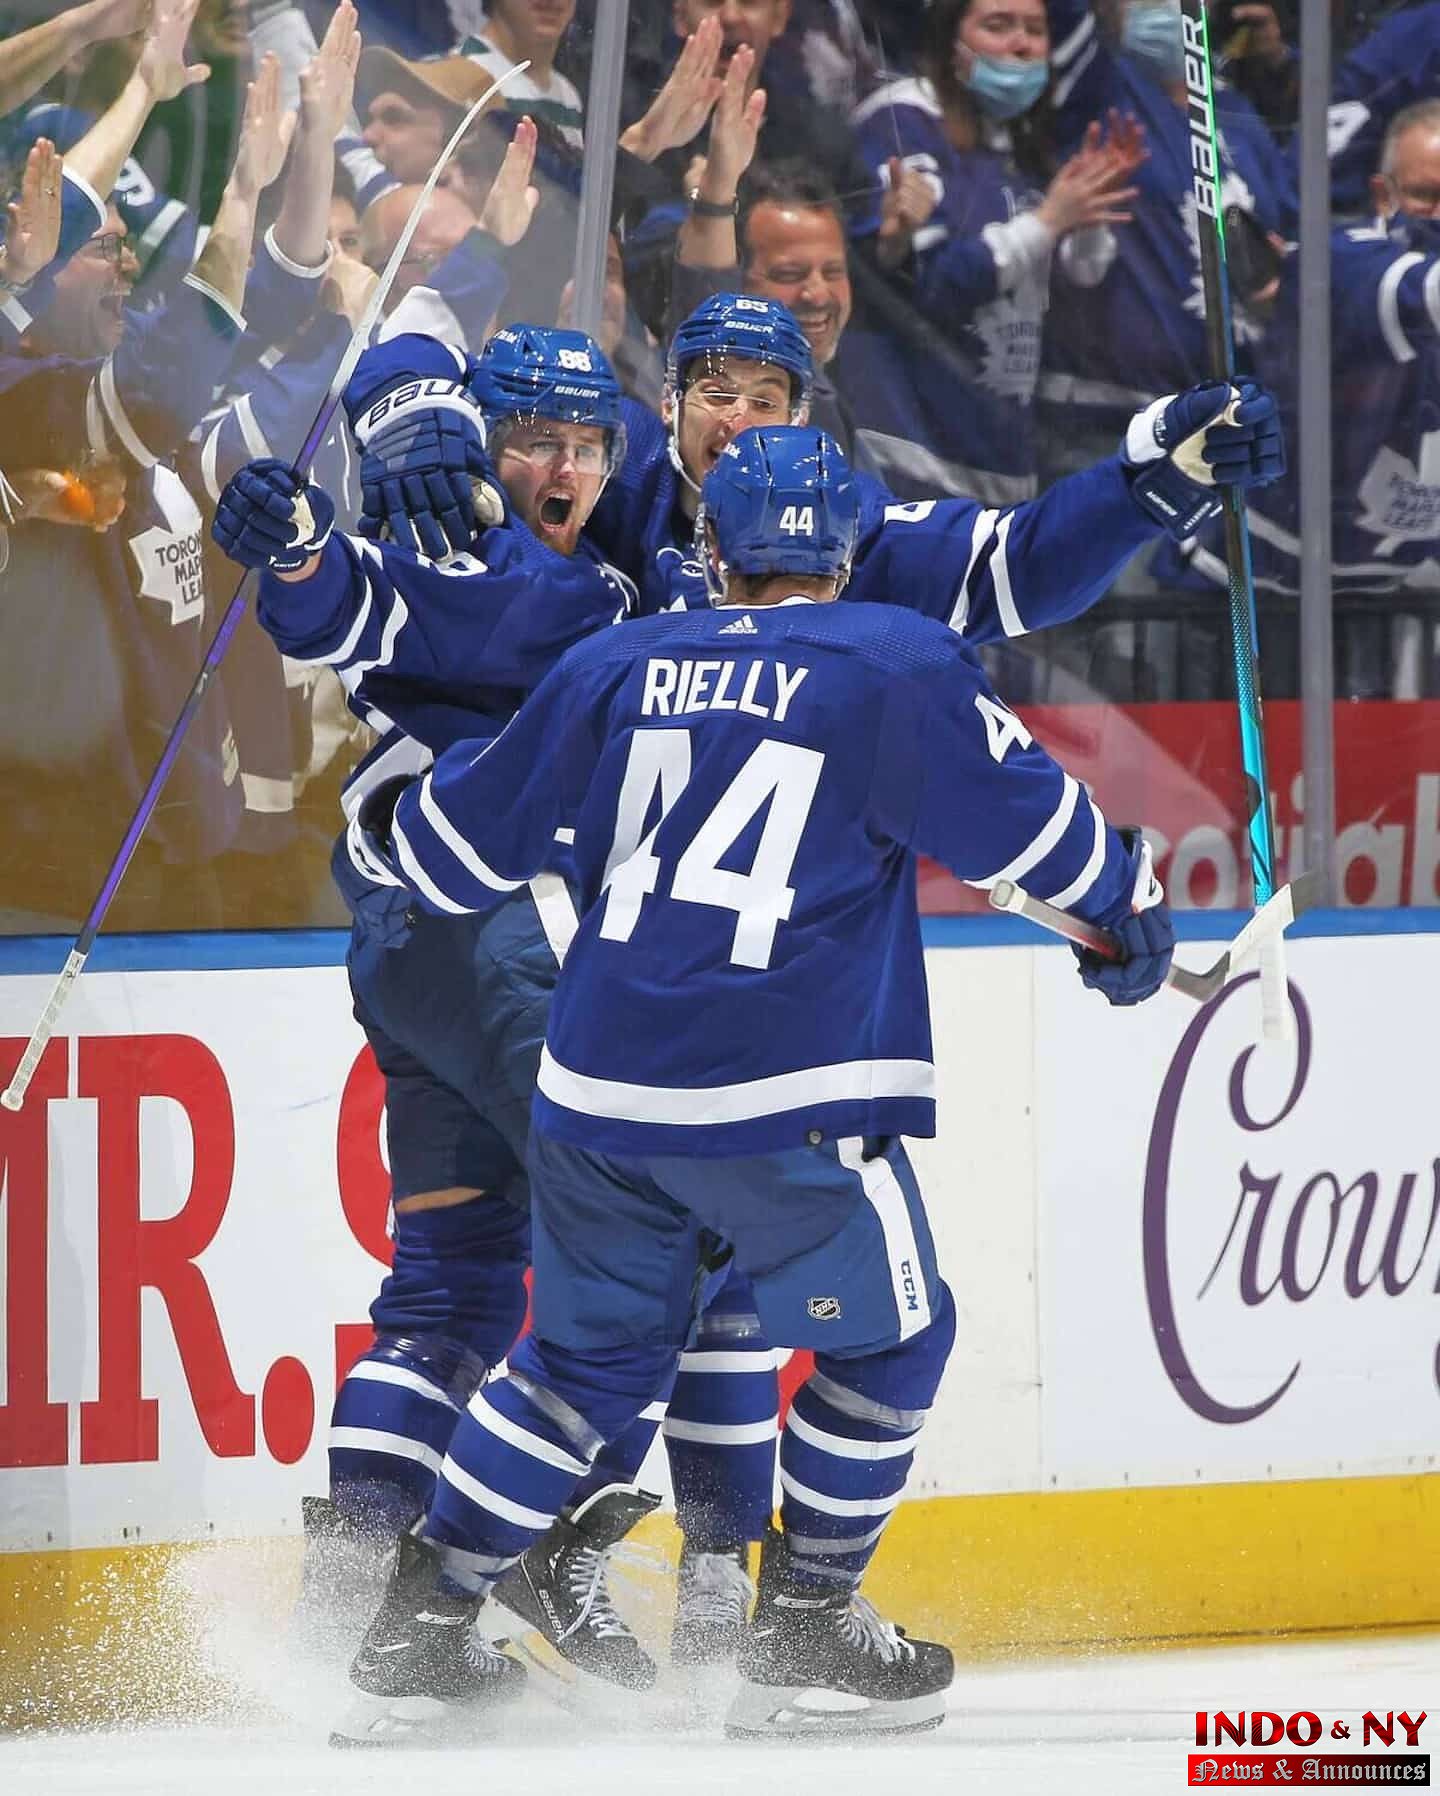 A first since 2004 for the Maple Leafs?